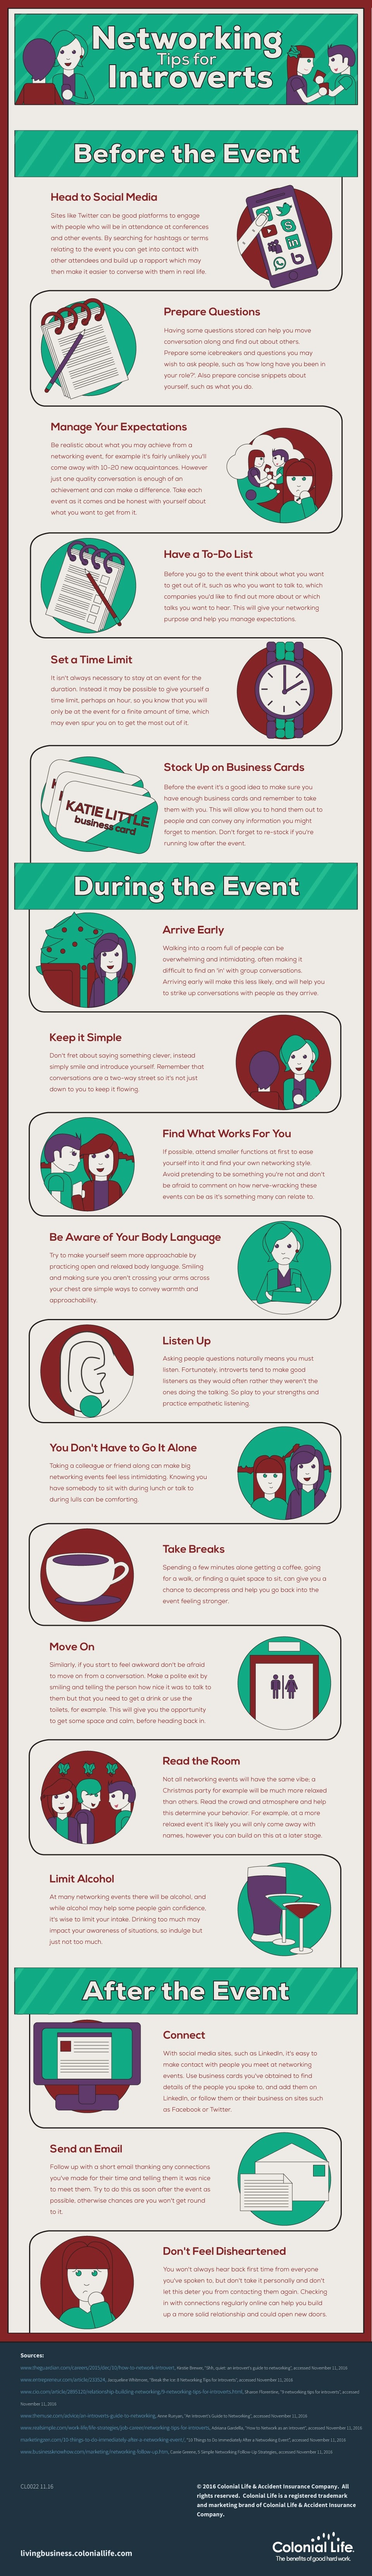 Networking Tips for Introverts - #infographic